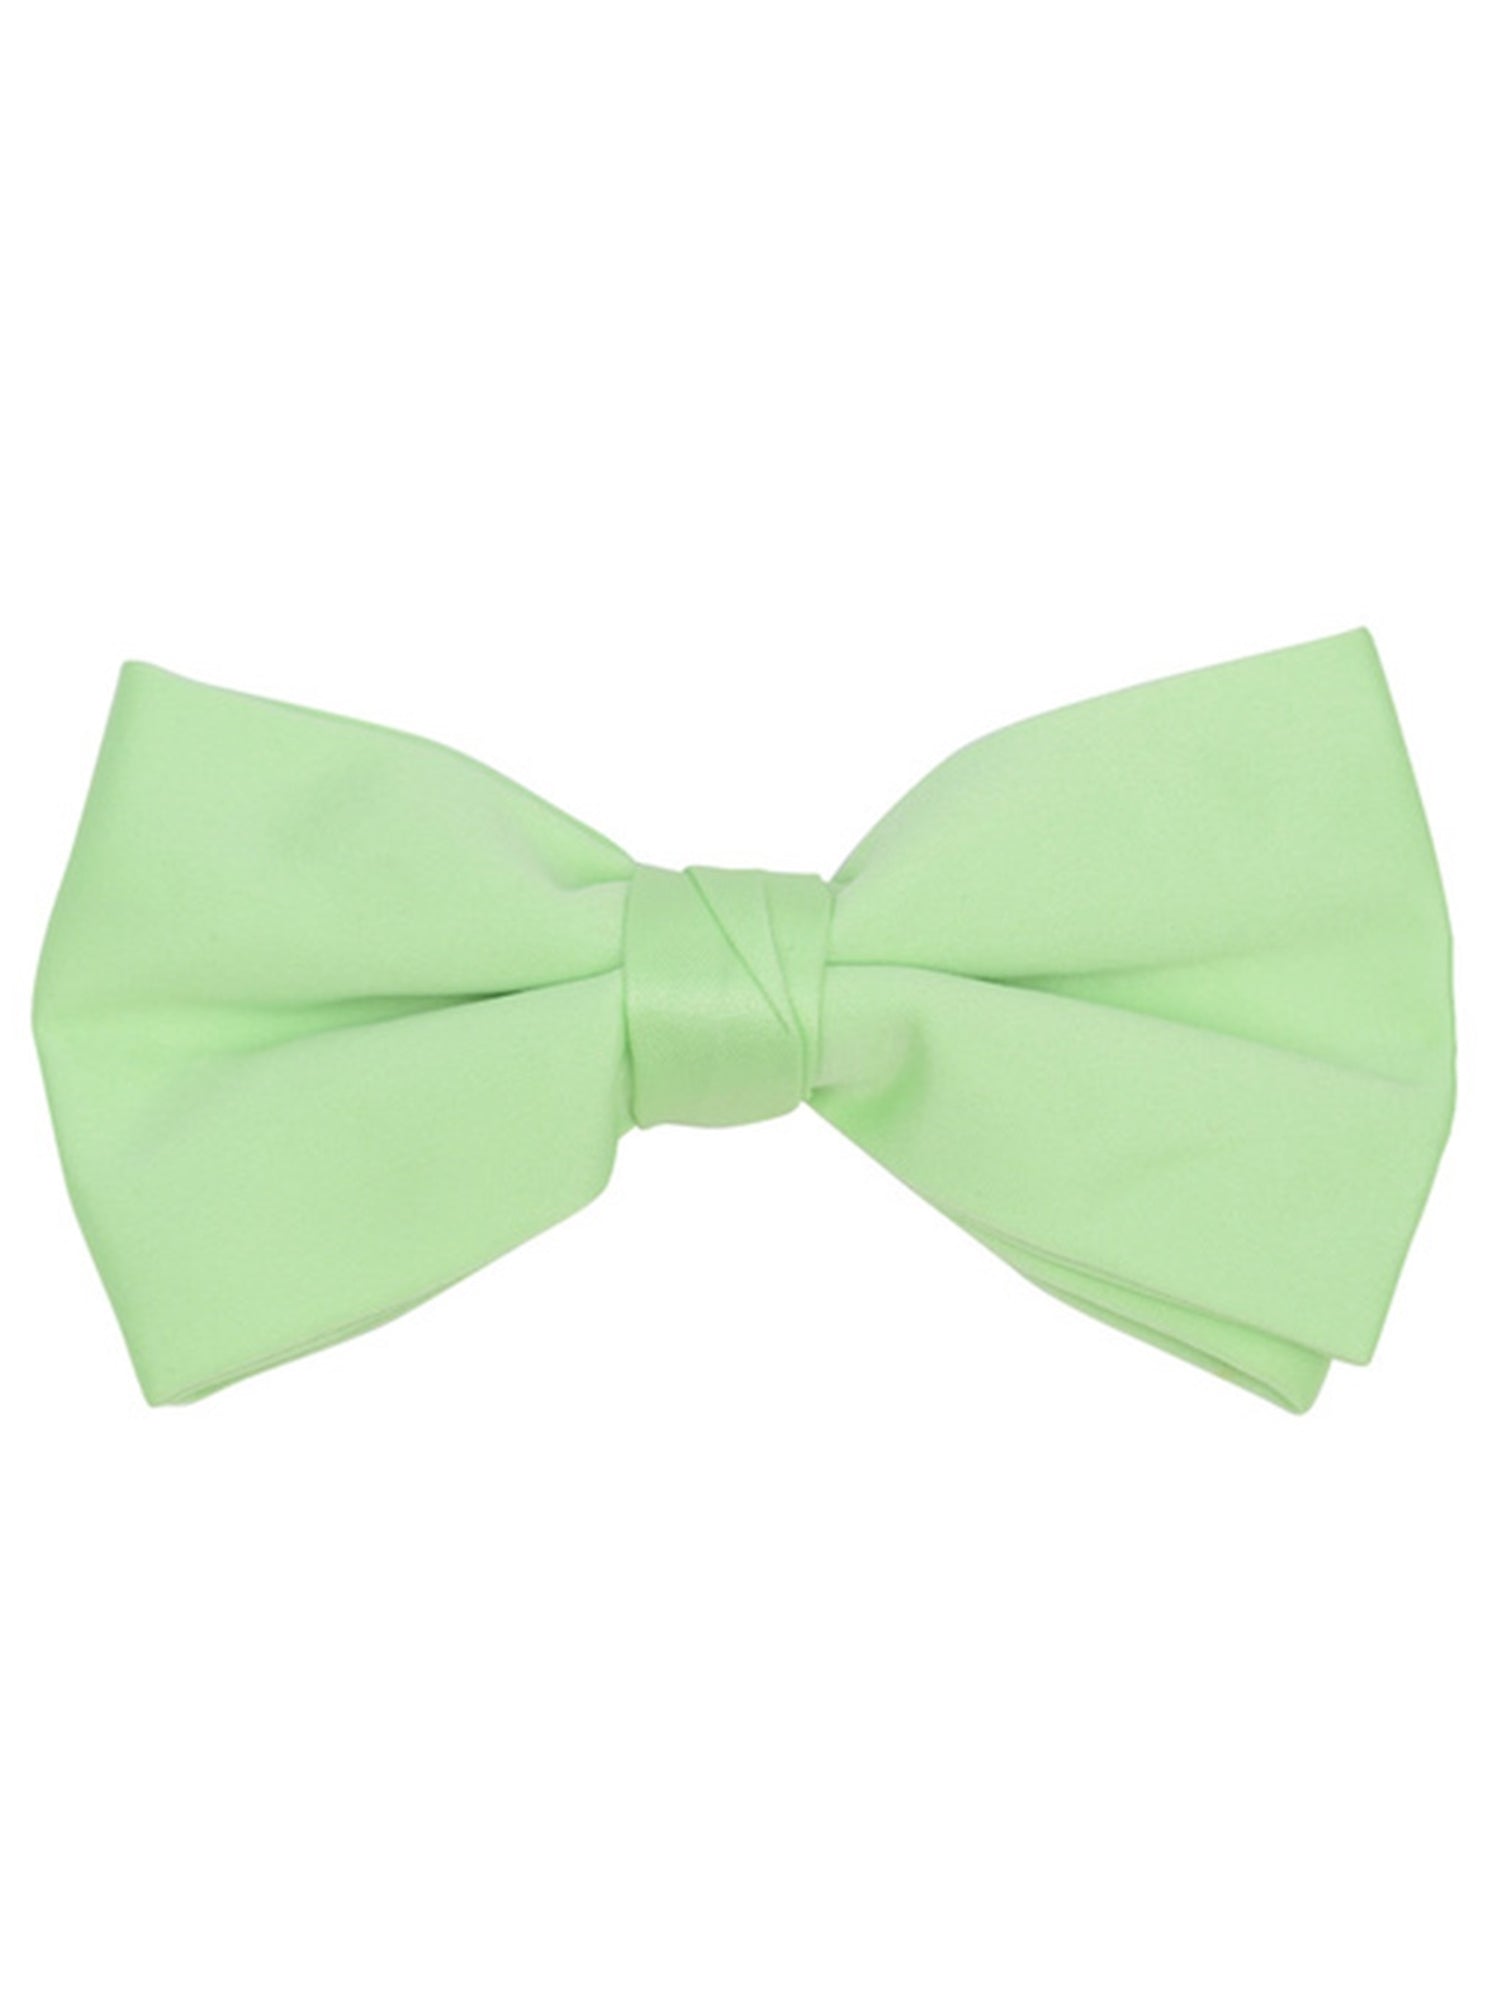 Young Boy's Pre-tied Clip On Bow Tie - Formal Tuxedo Solid Color Boy's Solid Color Bow Tie TheDapperTie Lime One Size 